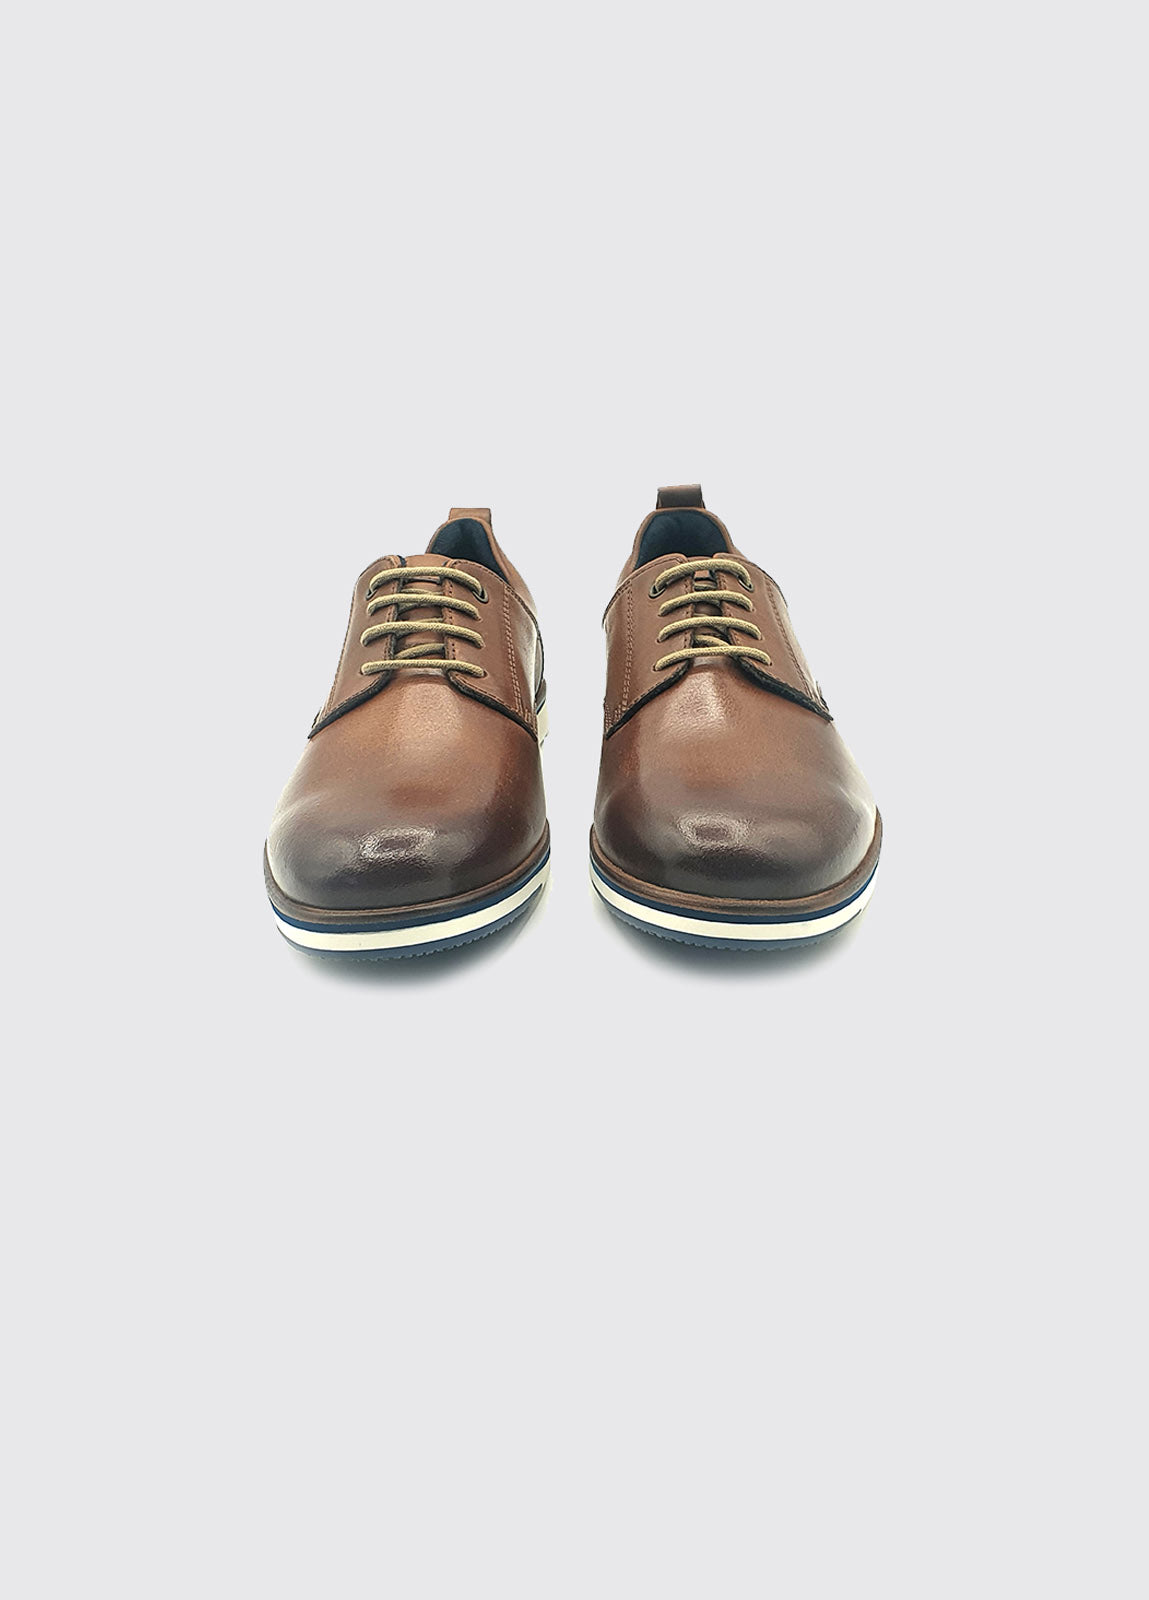 Stafford Tan Mens Shoe-Front view